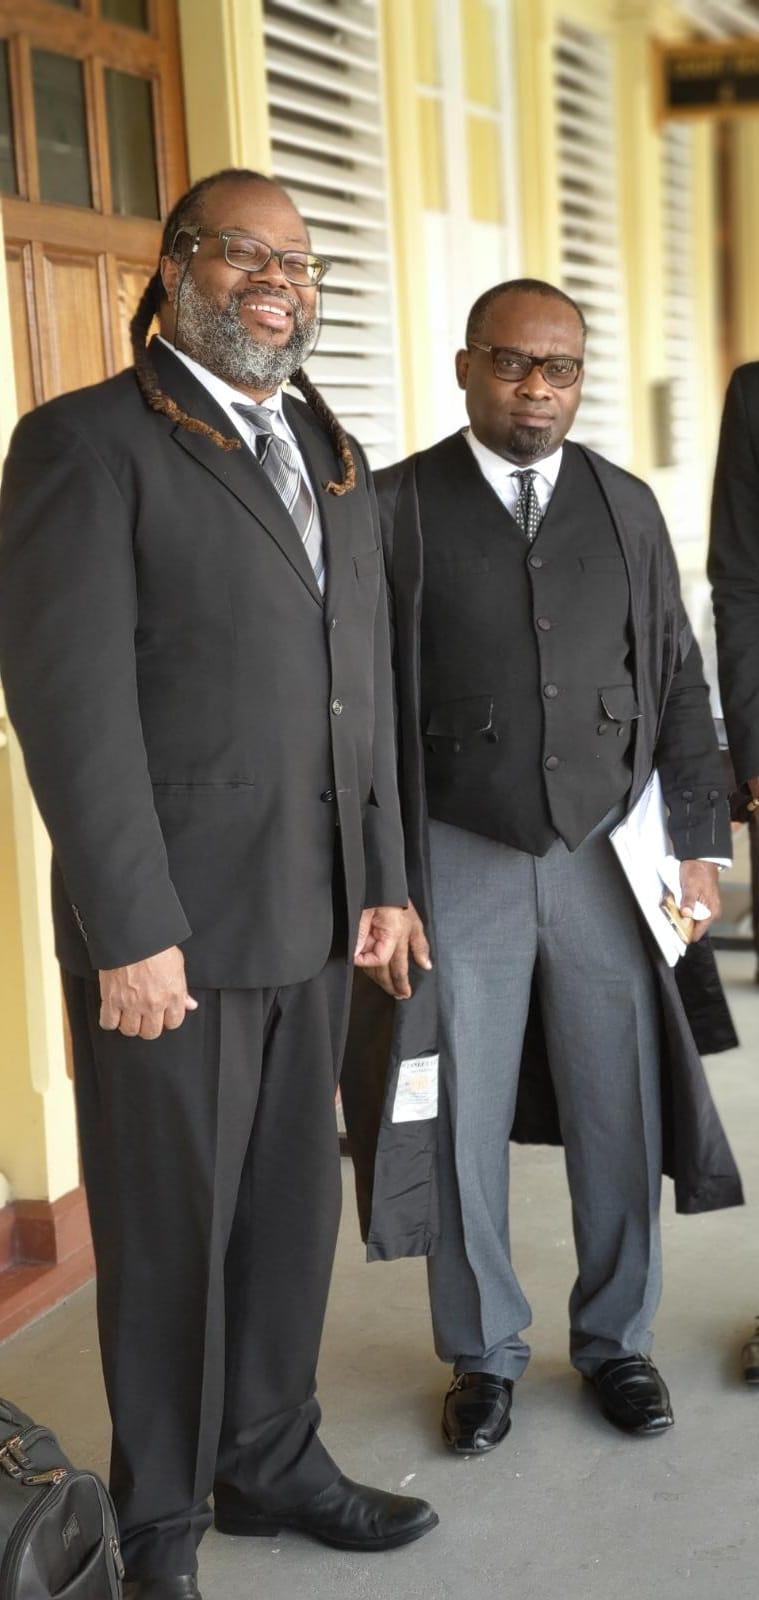 (At right) Senior Counsel Forde was joined by Canada based Guyanese Lawyer, Selwyn Pieters at the hearing of the election petition appeal.